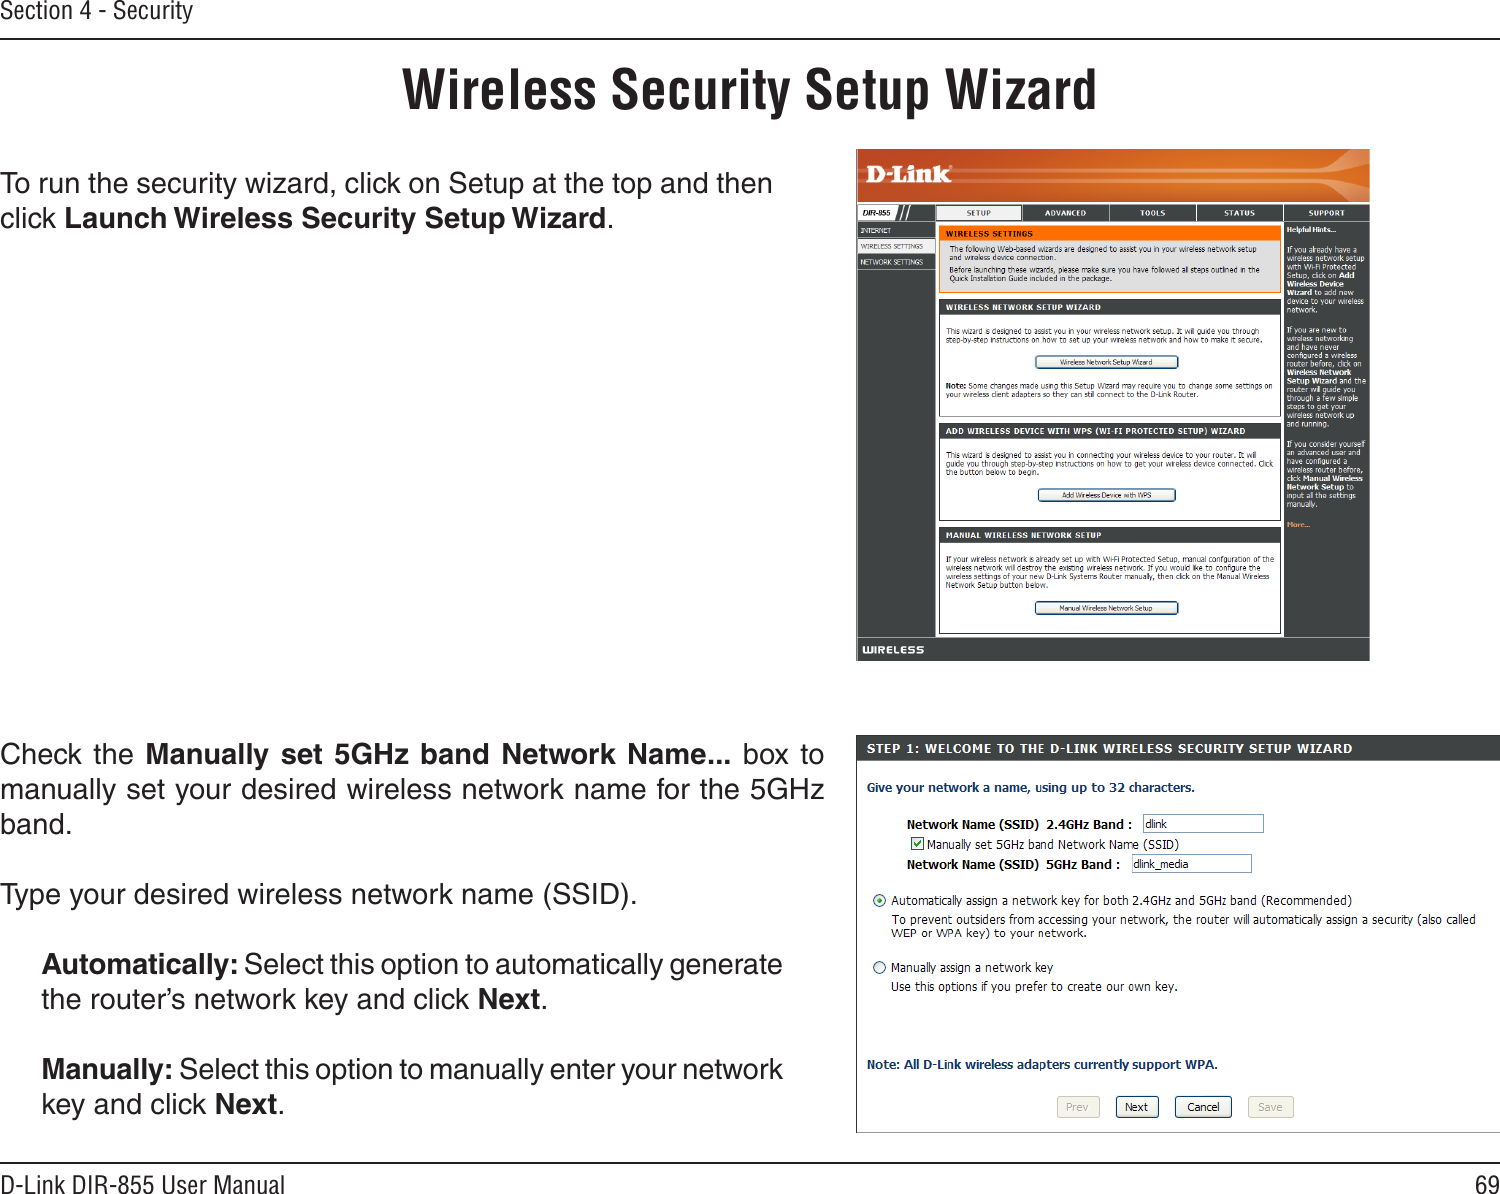 69D-Link DIR-855 User ManualSection 4 - SecurityWireless Security Setup WizardTo run the security wizard, click on Setup at the top and then click Launch Wireless Security Setup Wizard.Check the Manually set 5GHz band Network Name...  box to manually set your desired wireless network name for the 5GHz band.Type your desired wireless network name (SSID). Automatically: Select this option to automatically generate the router’s network key and click Next.Manually: Select this option to manually enter your network key and click Next.